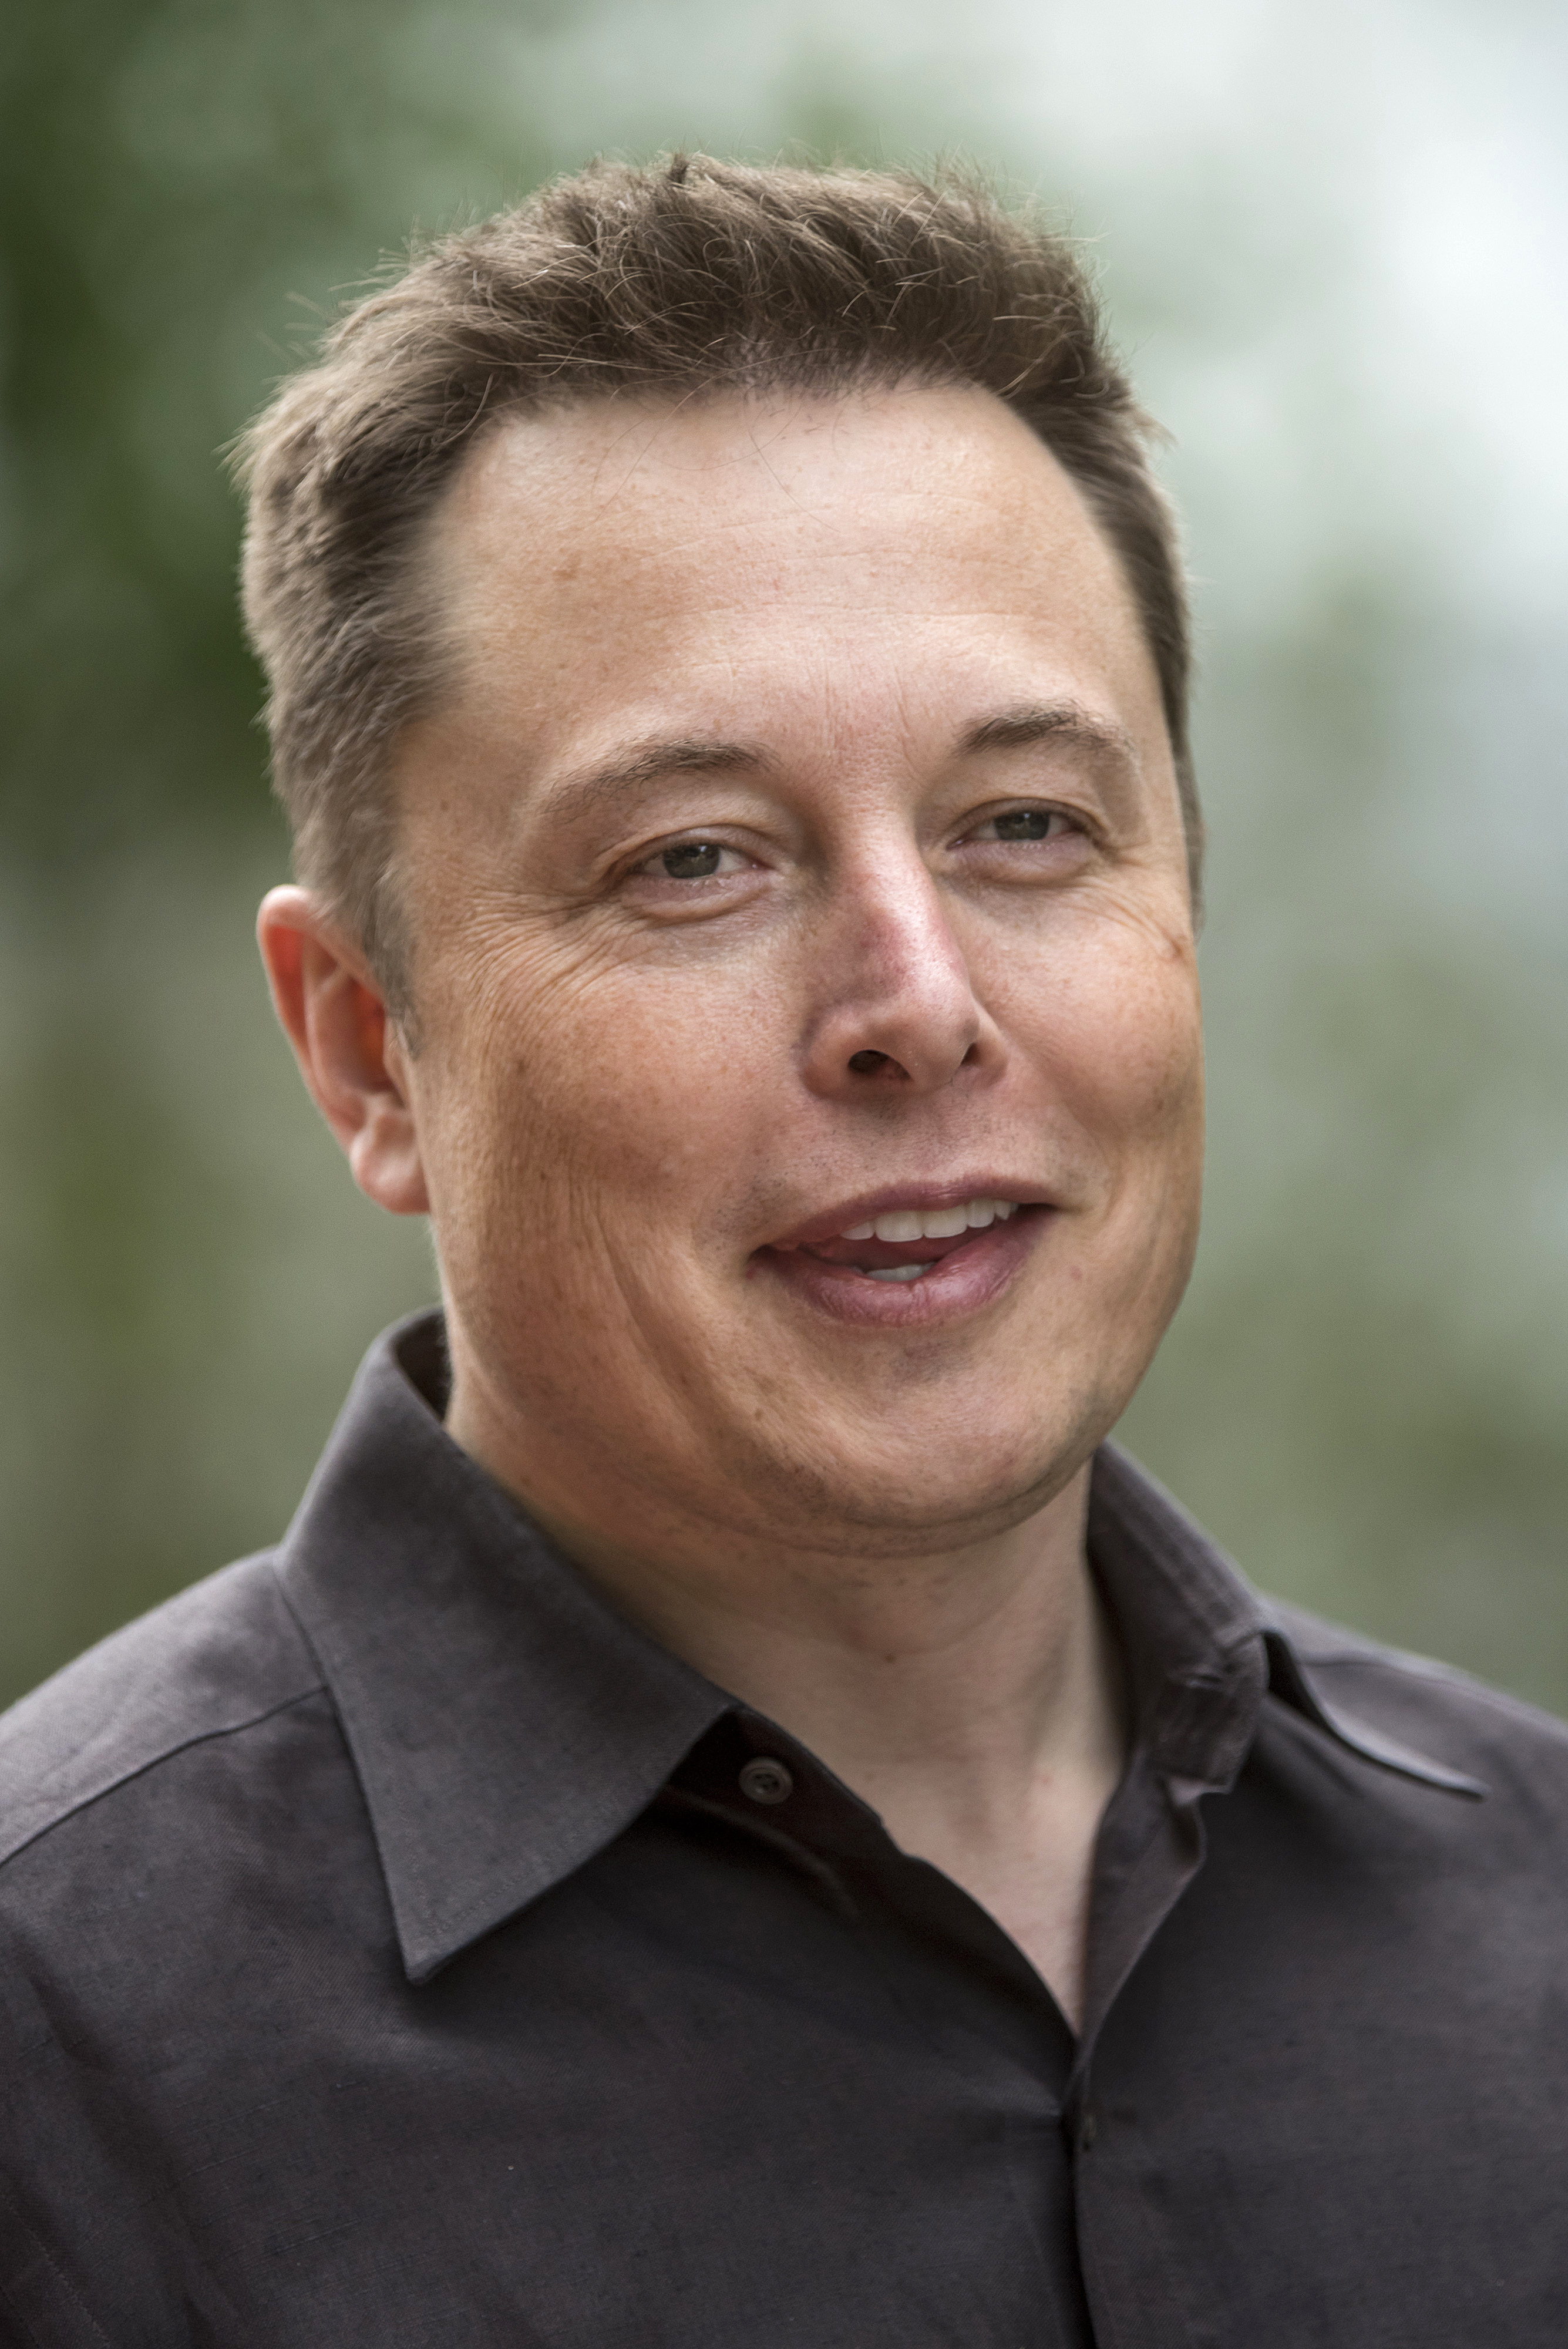 Elon Musk at the Allen &amp; Co. Media and Technology Conference in Sun Valley, Idaho on July 8, 2015. (Paul Morris—Bloomberg via Getty Images)